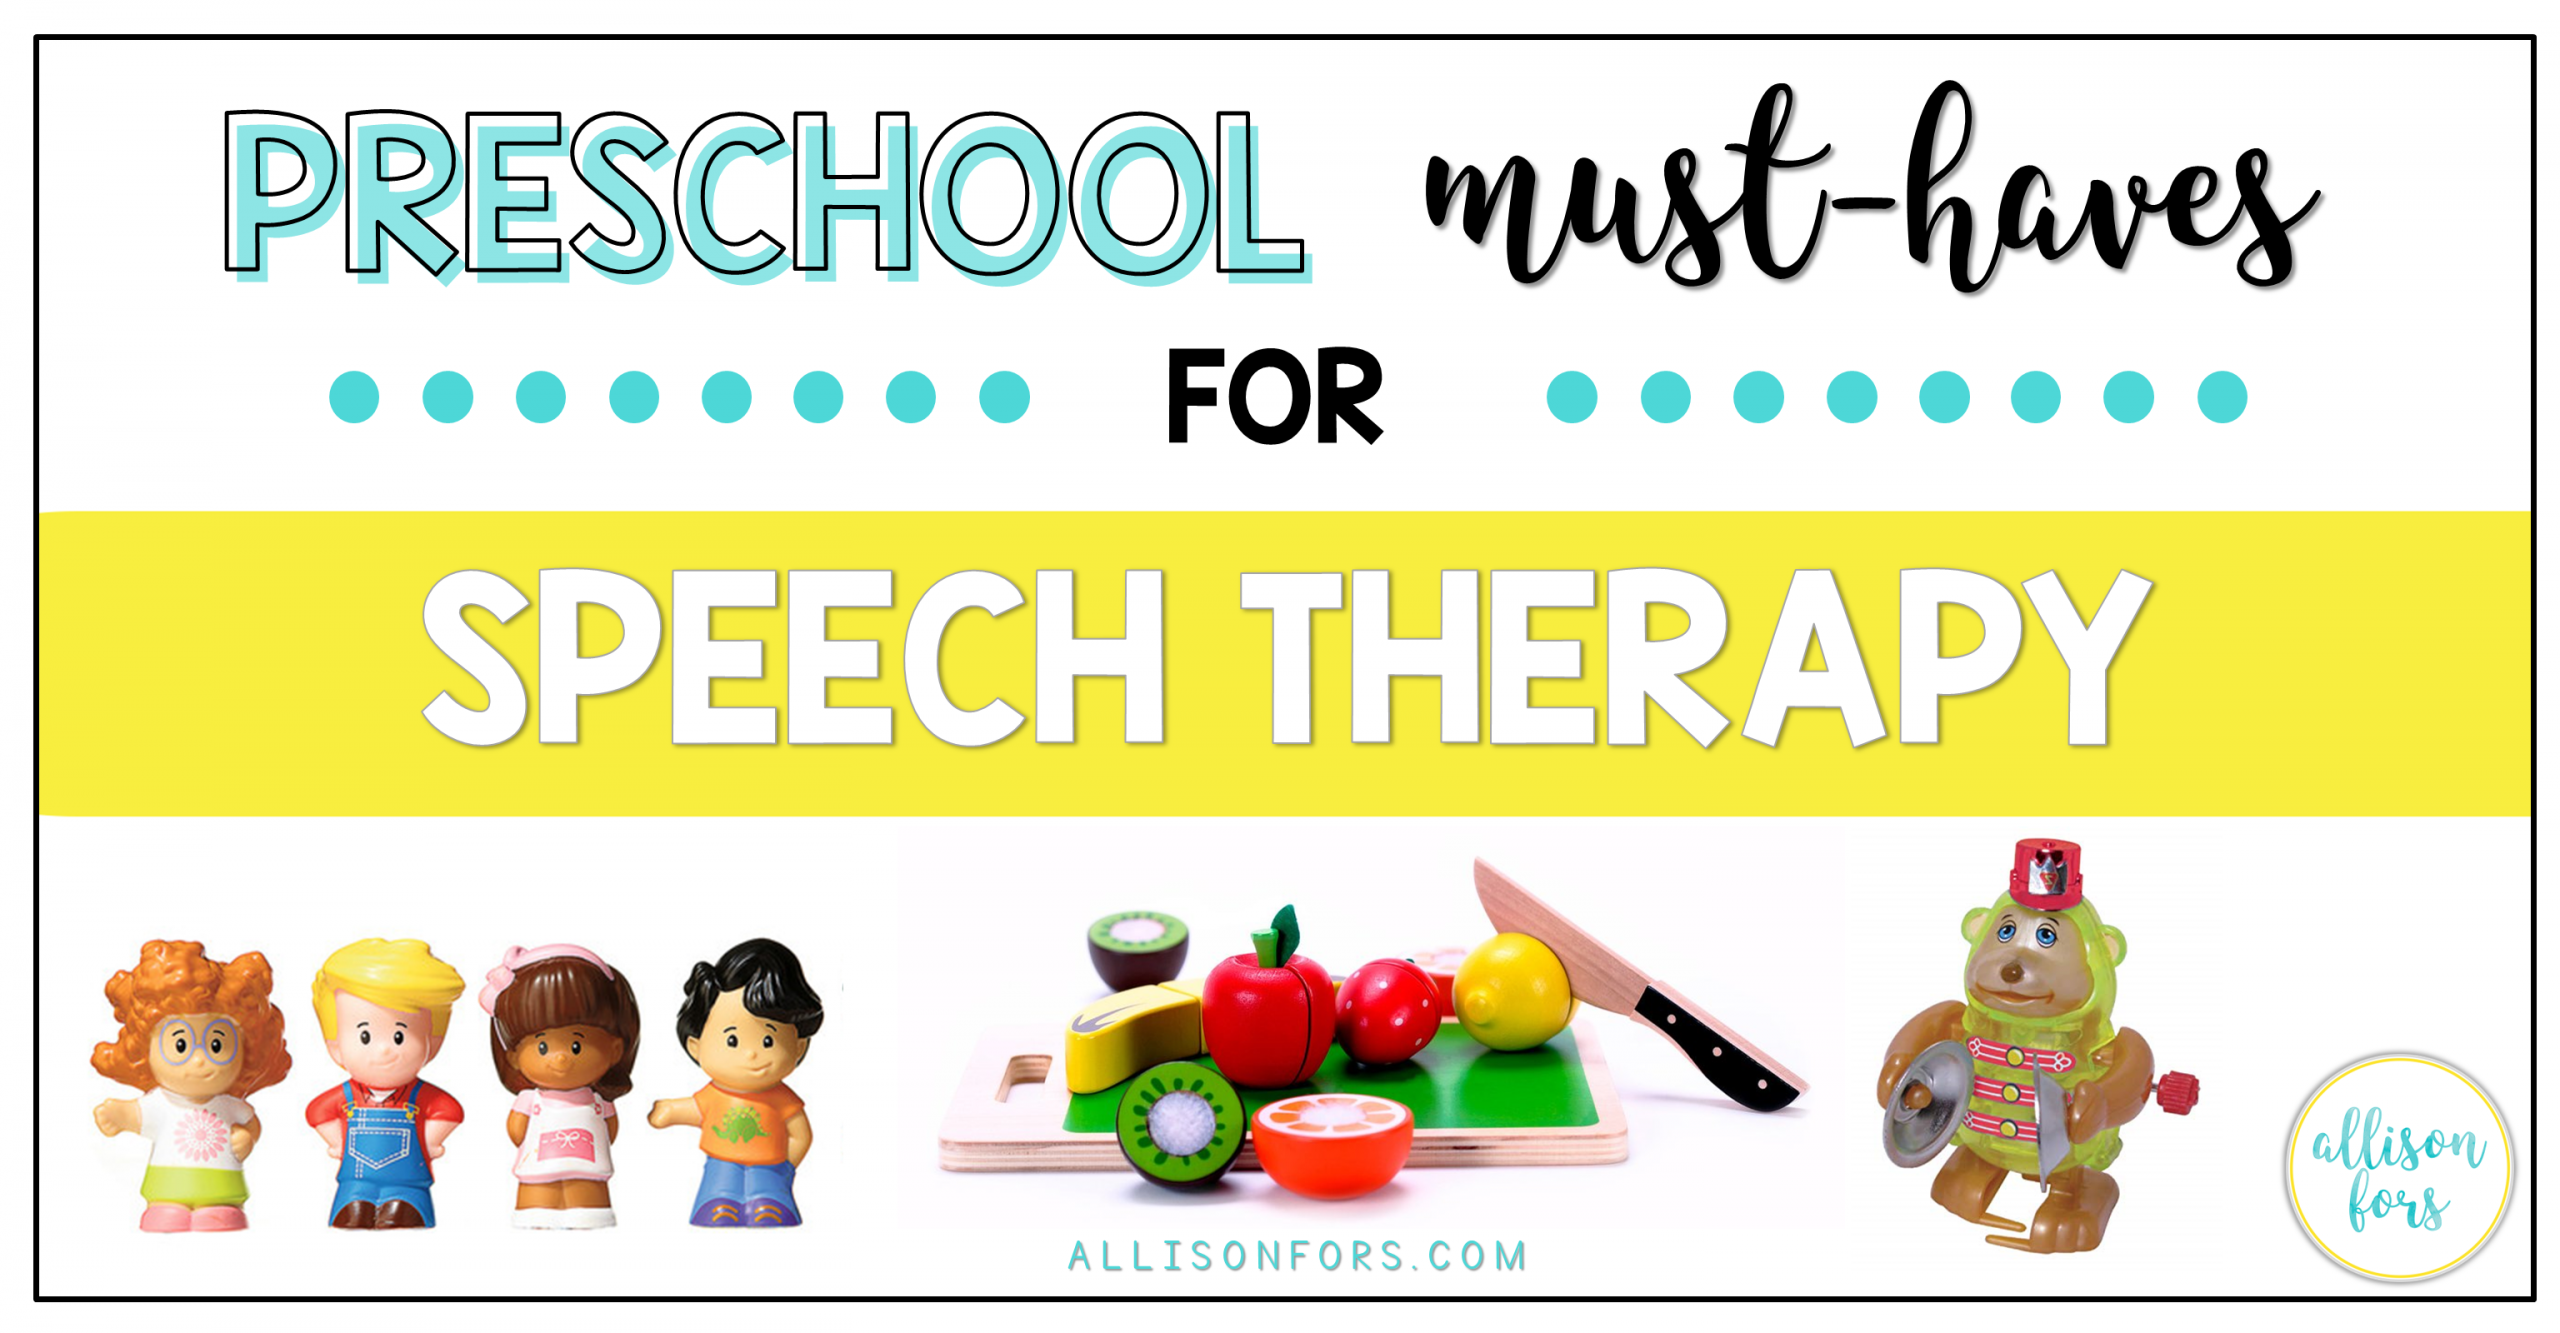 Preschool Must-Haves for Speech Therapy